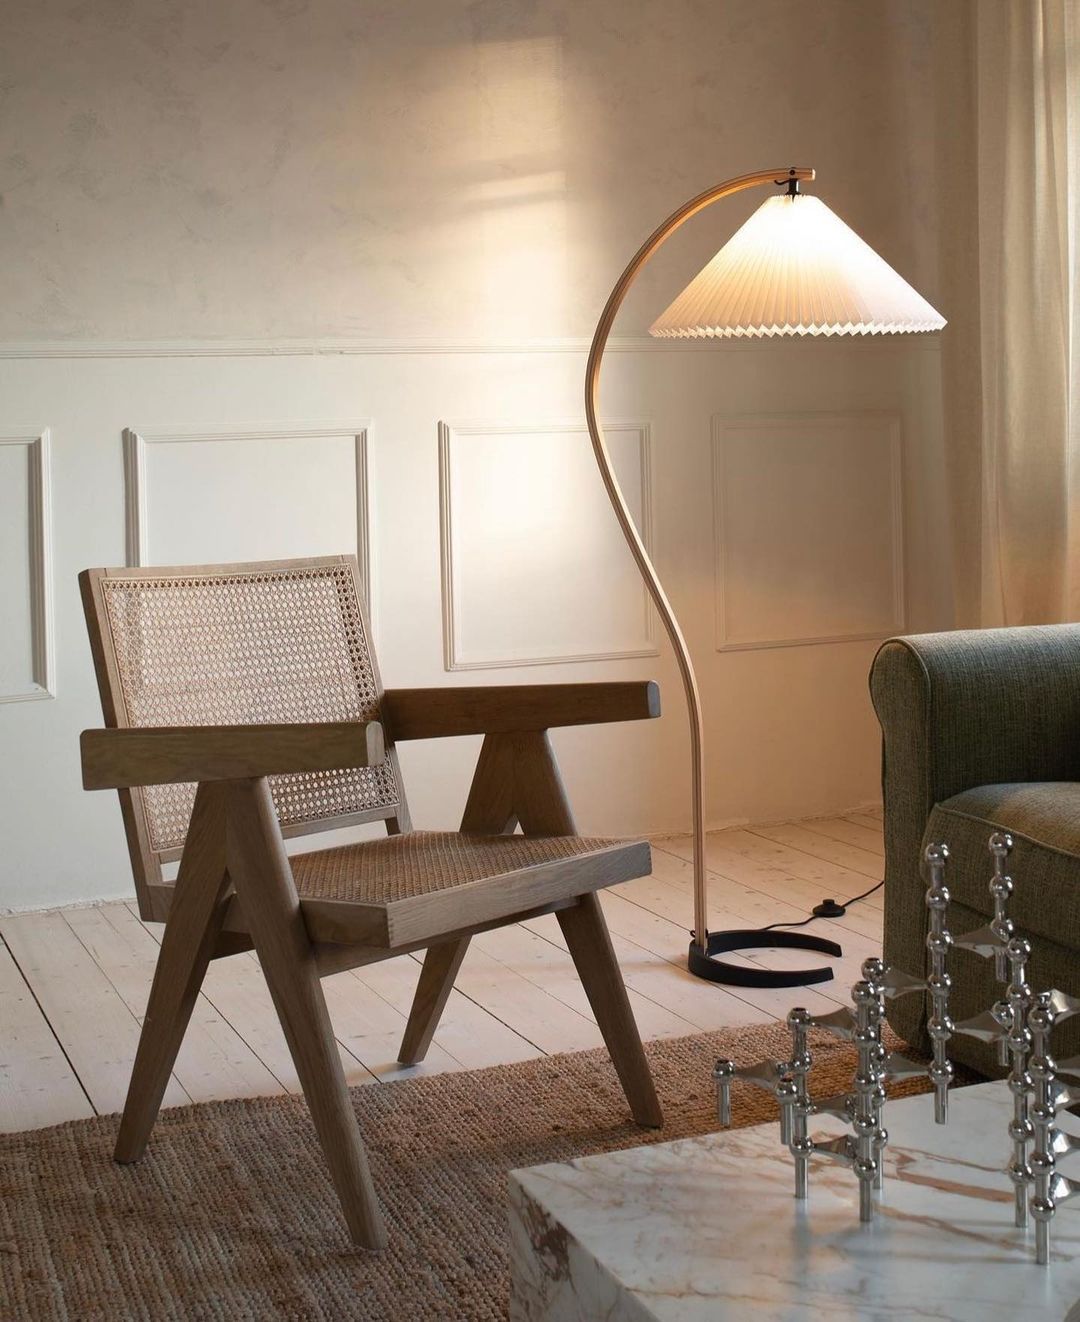 Quality Lamps Online Illuminate Your Space with Stylish and Functional Lighting Solutions